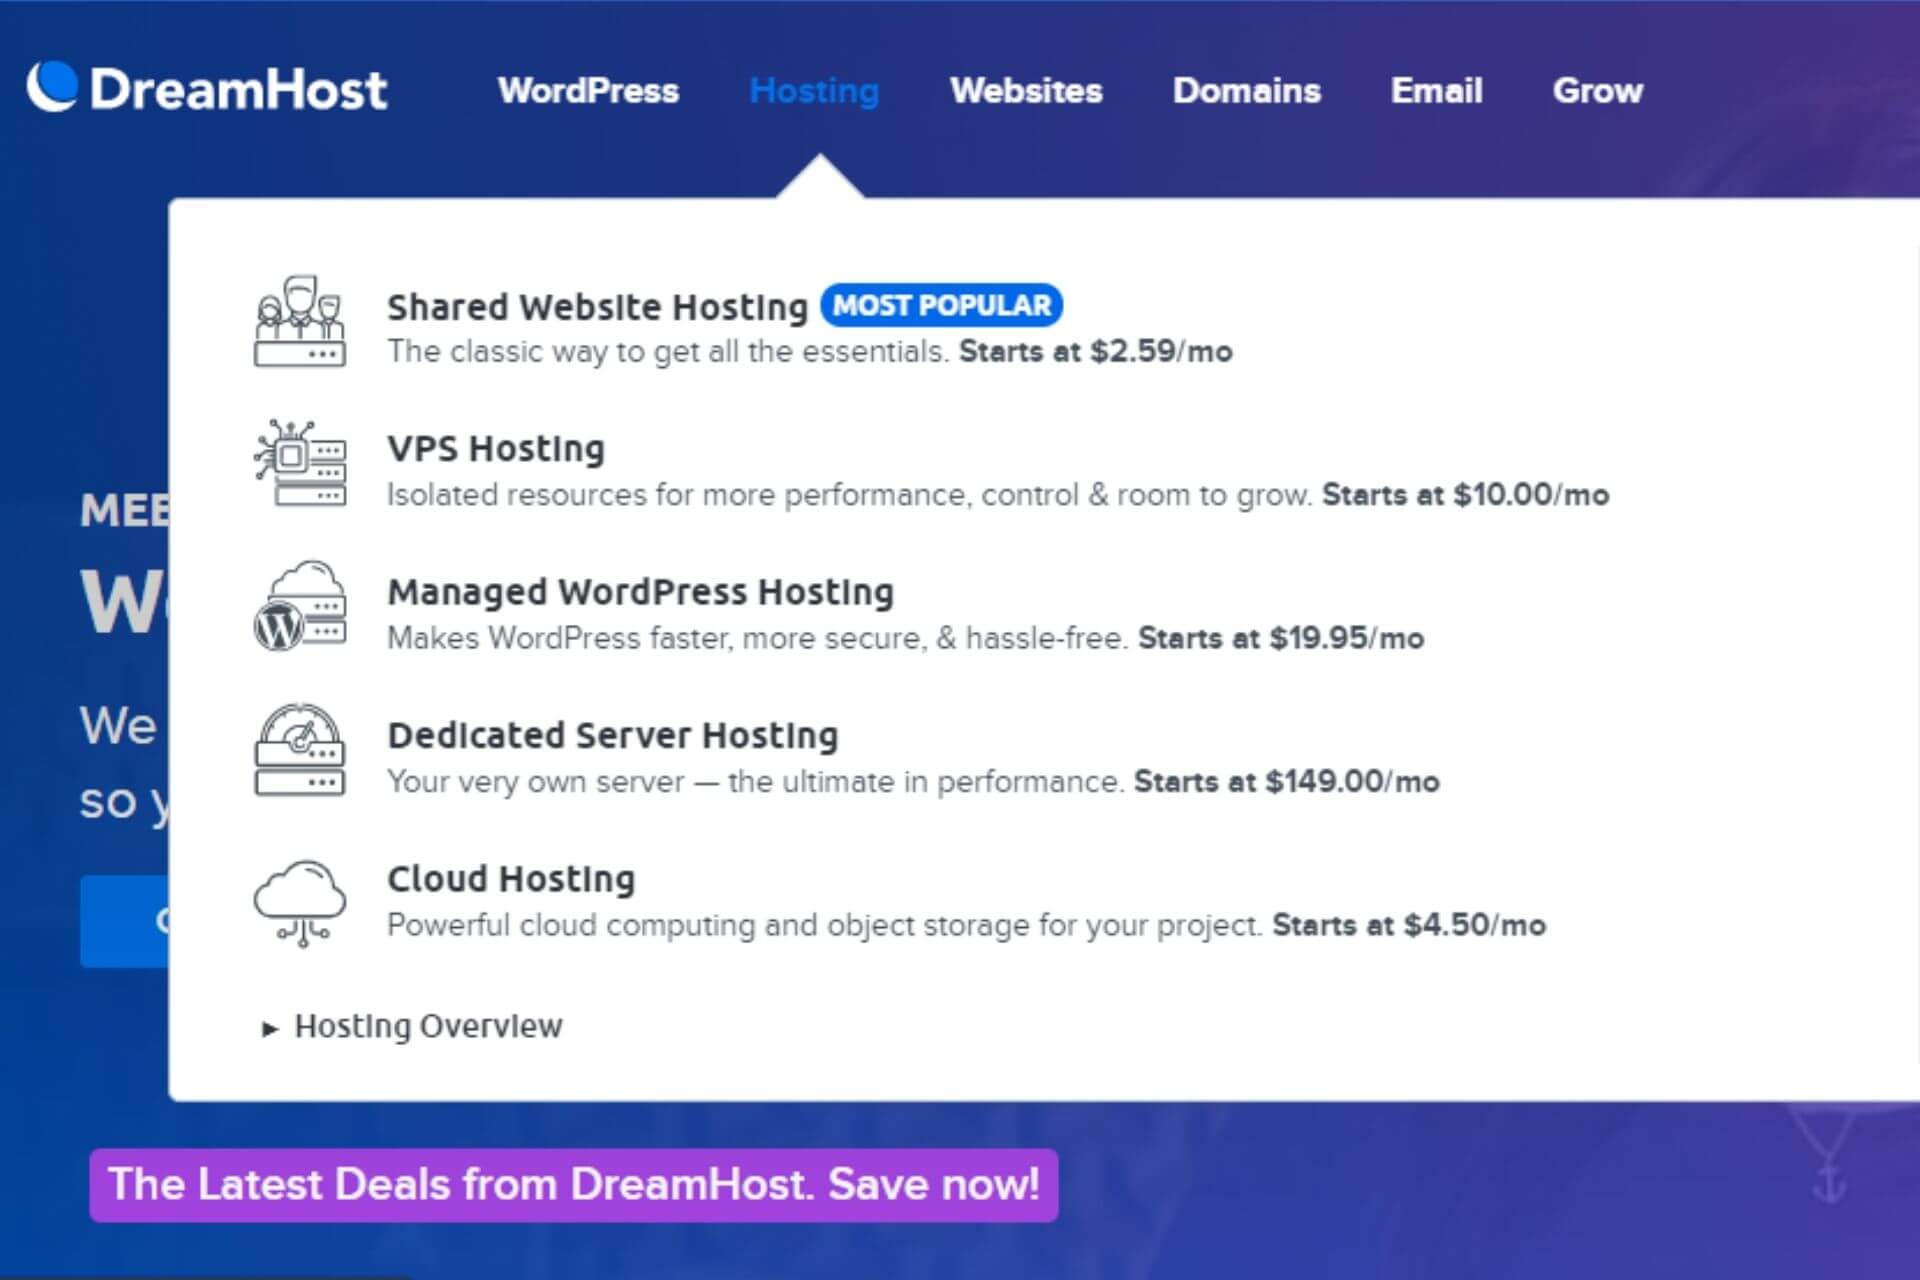 DreamHost Available Hosting Plans